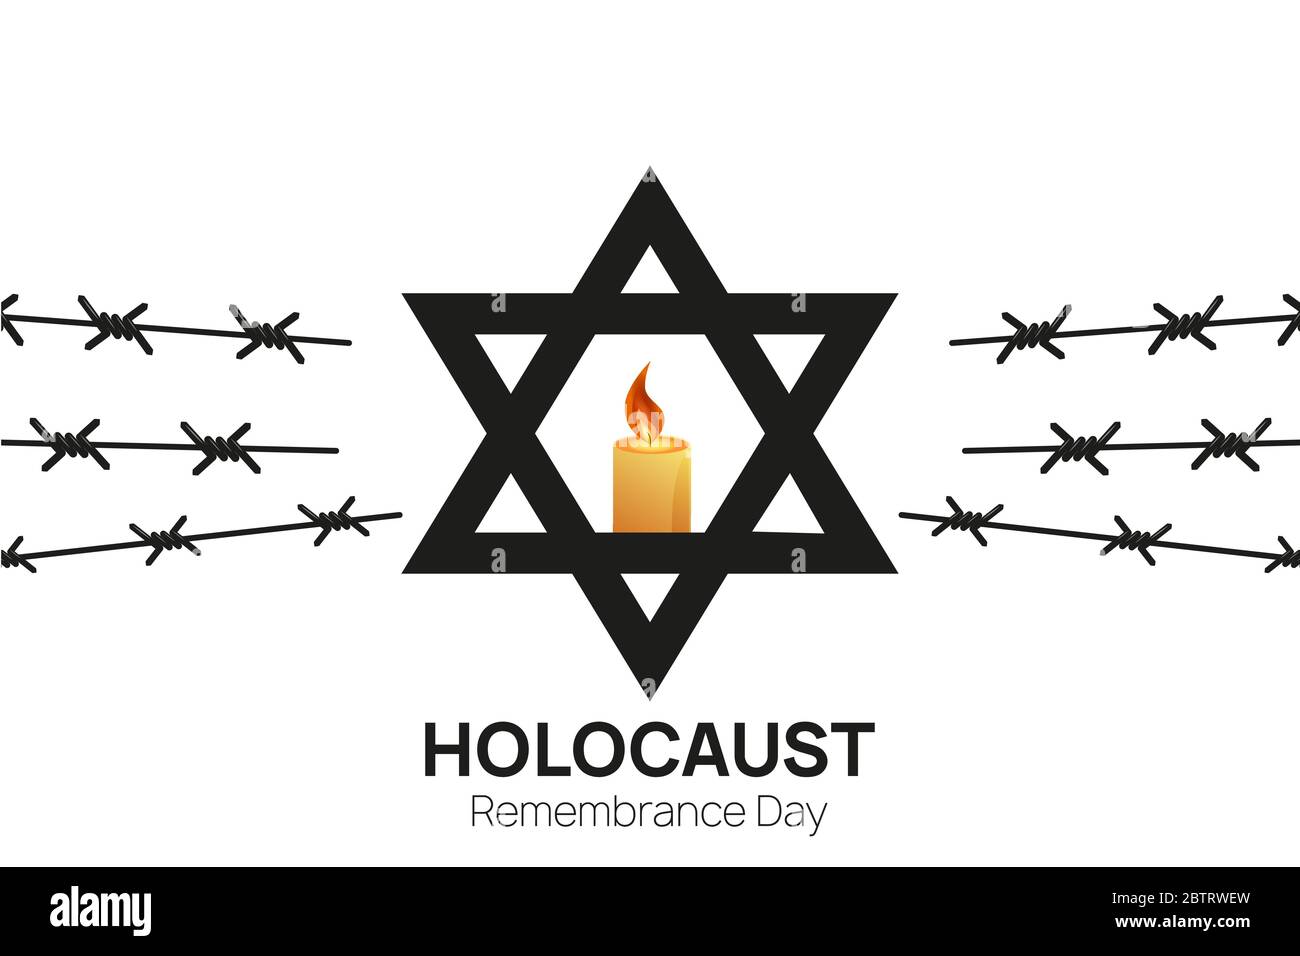 Holocaust Remembrance Day 27th of January Template. Jewish Star of David and Three Candles among barbed wire. Vector illustration Stock Vector